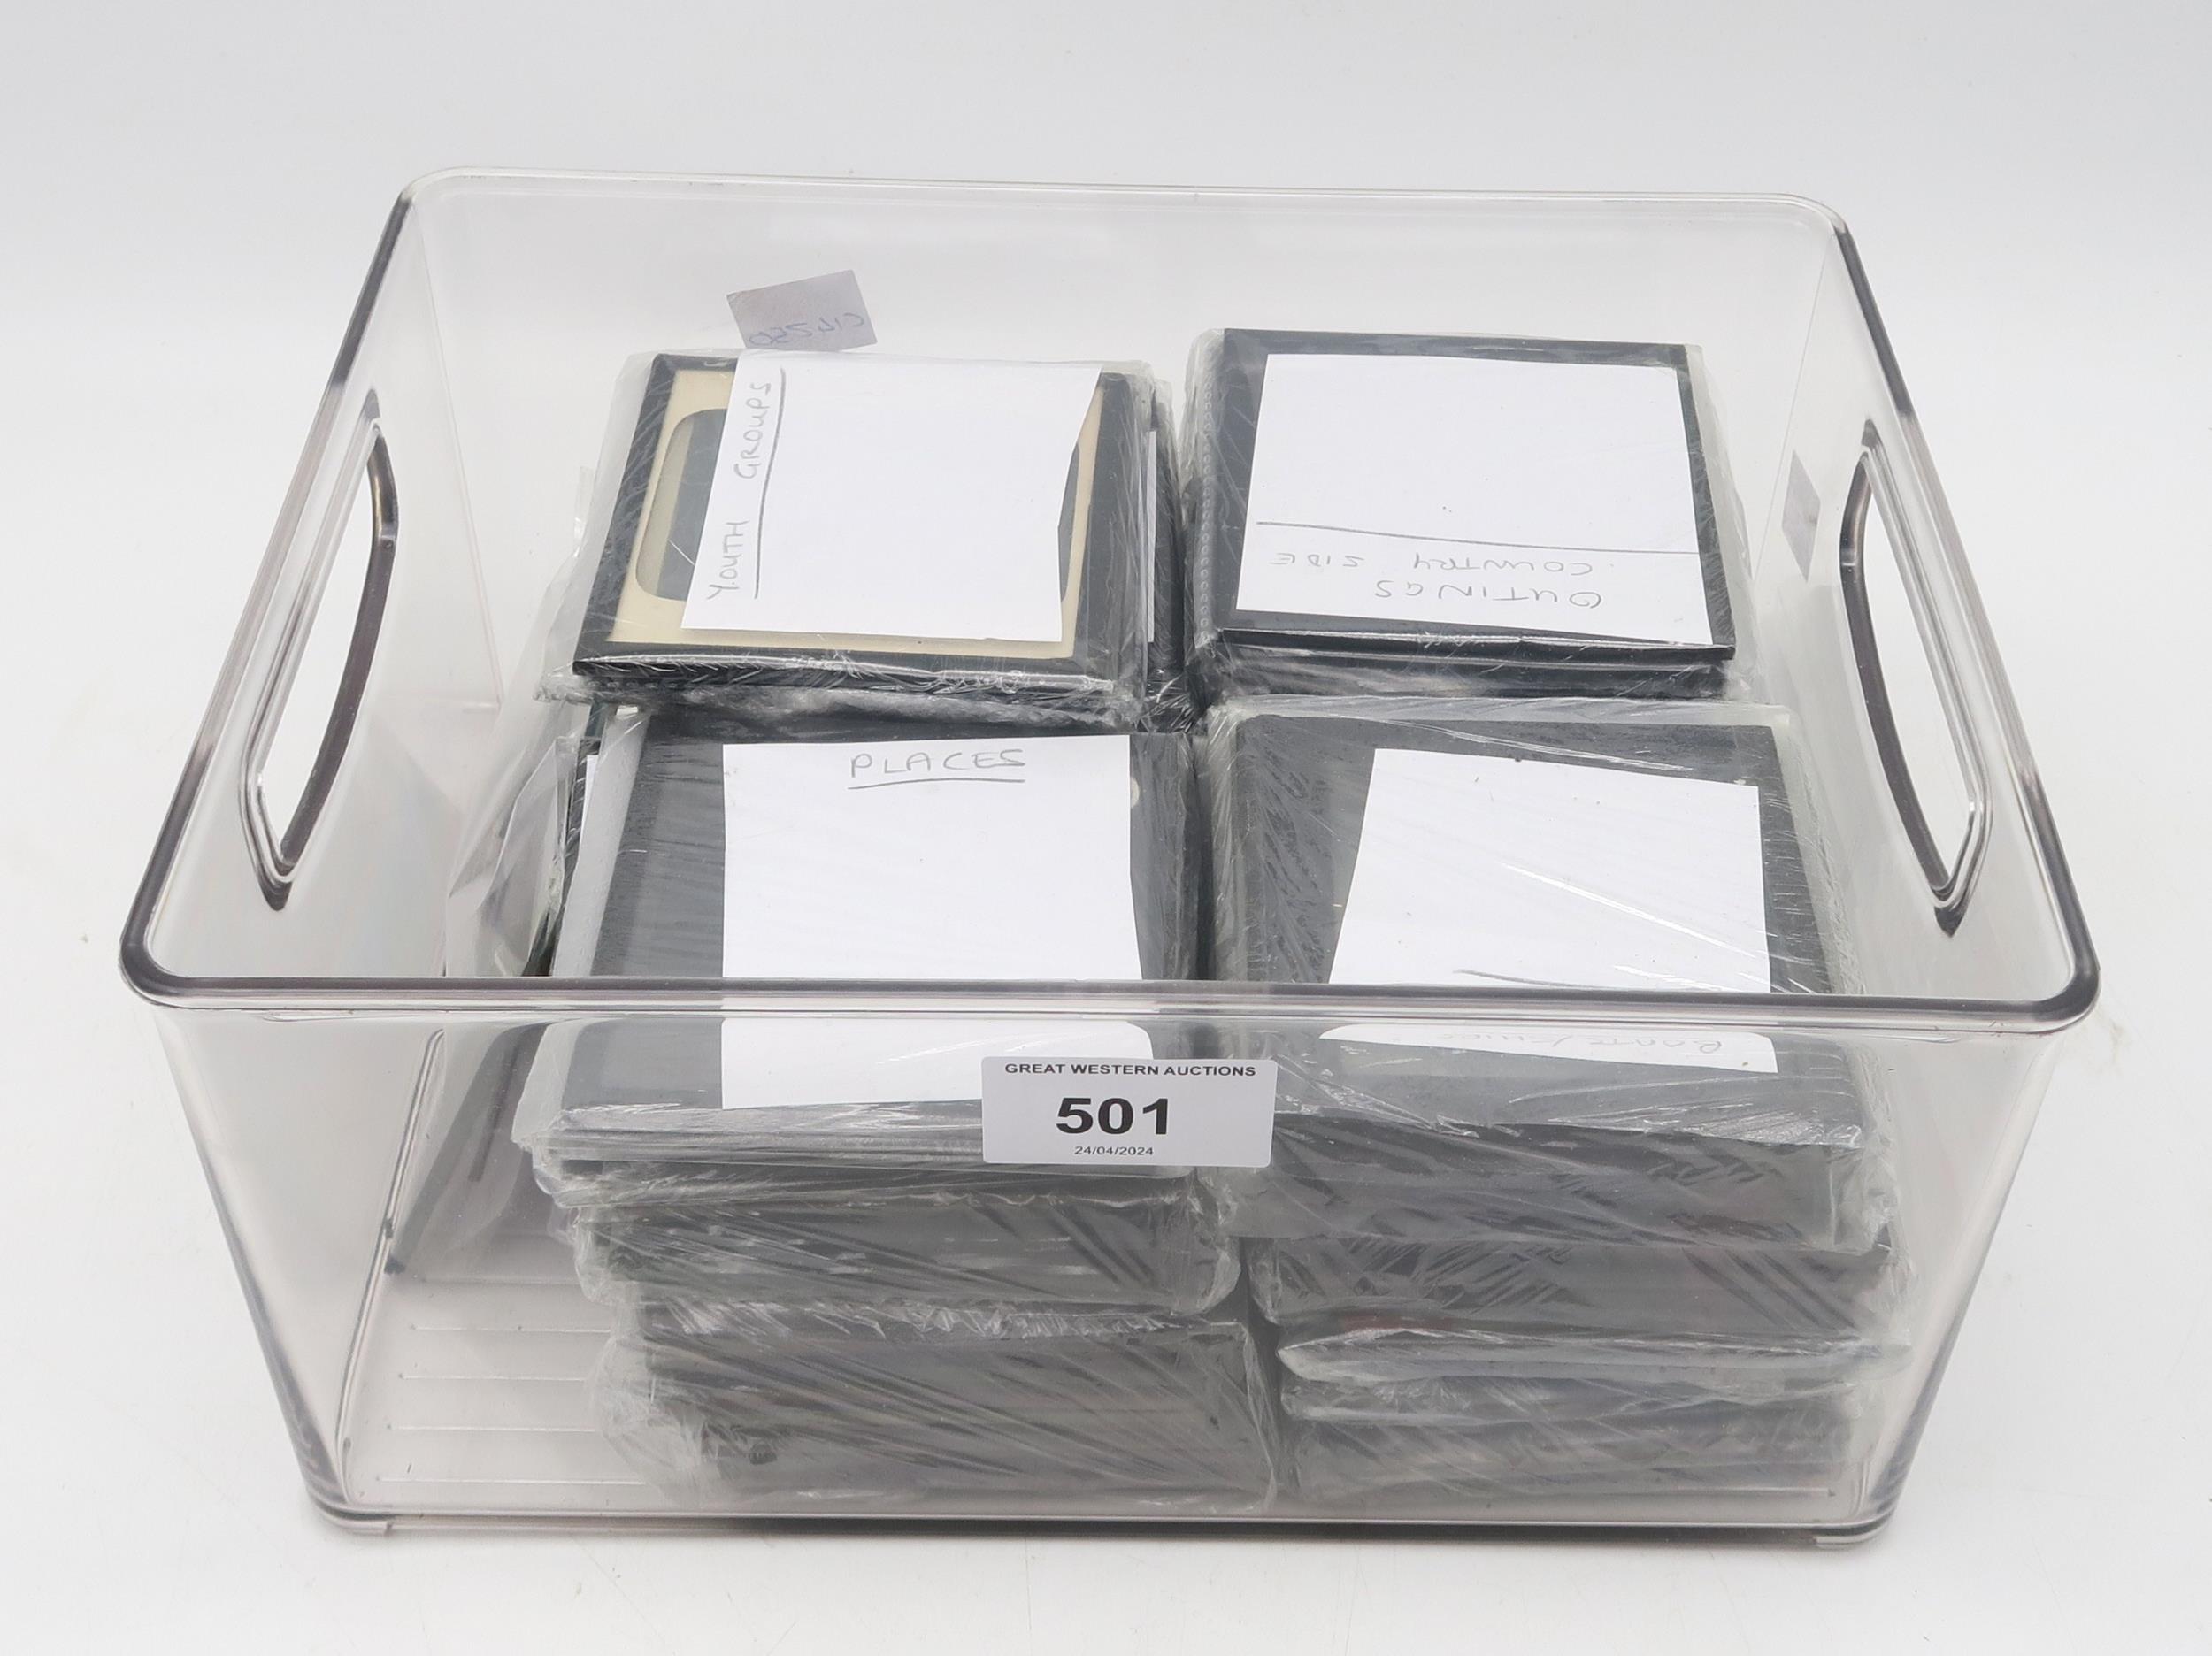 A collection of early-20th century glass photographic lantern slides, relating to members of the